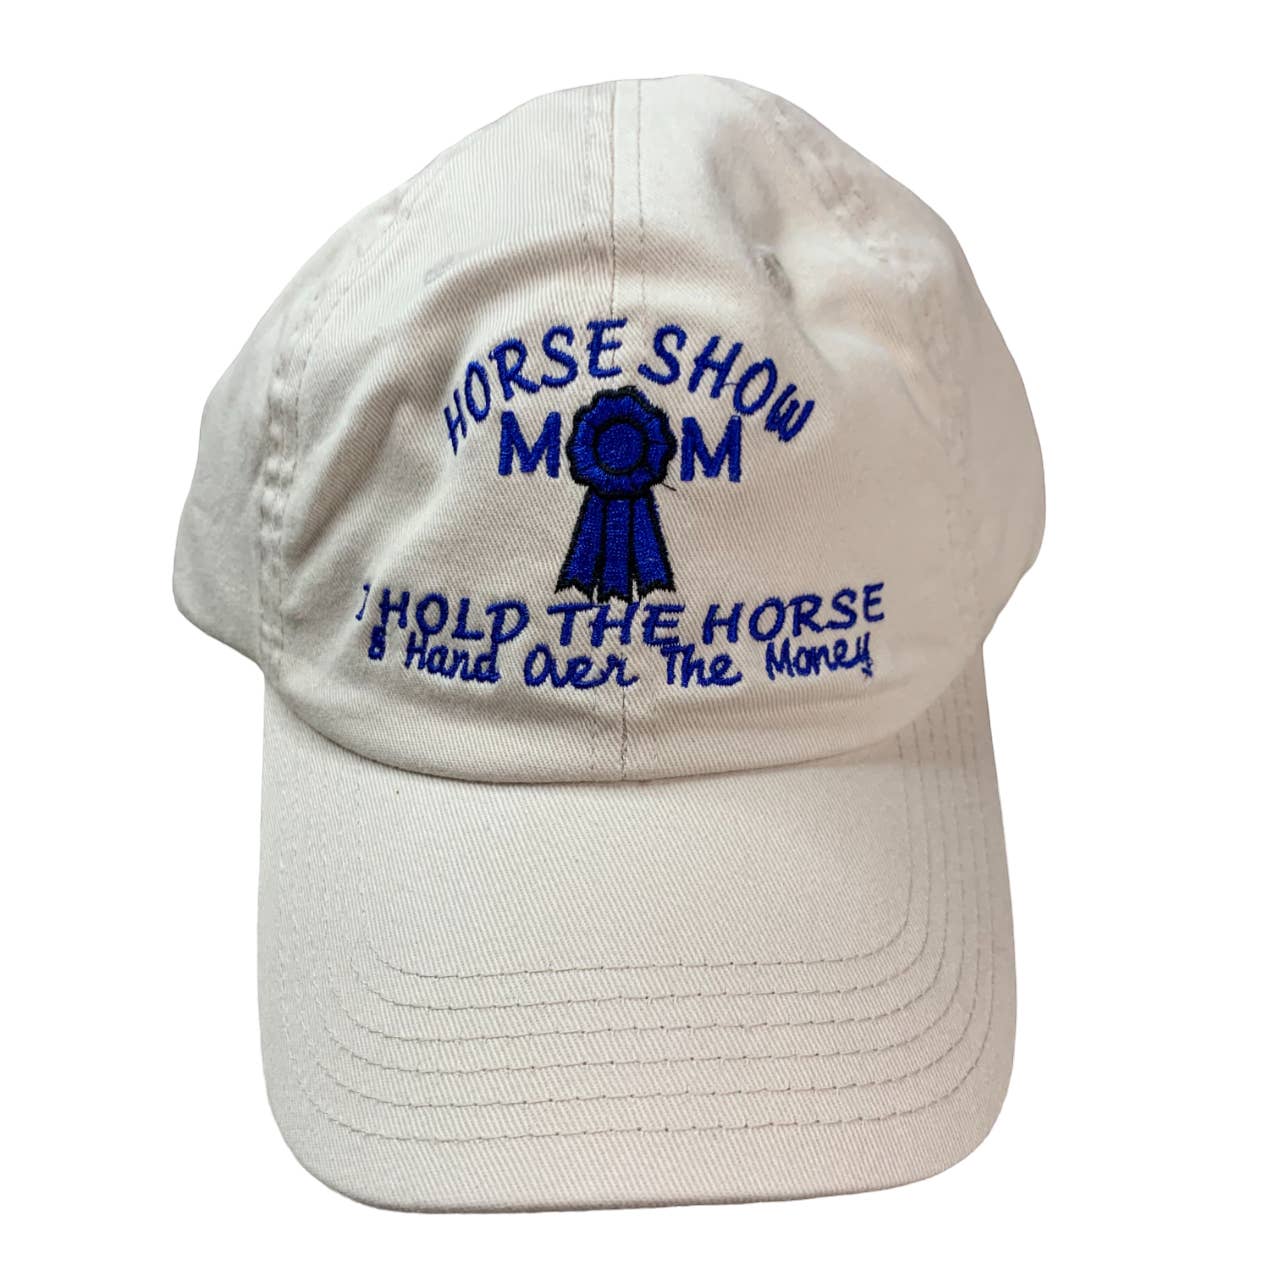 'Horse Show Mom' Embroidered Equestrian Baseball Cap - One Size